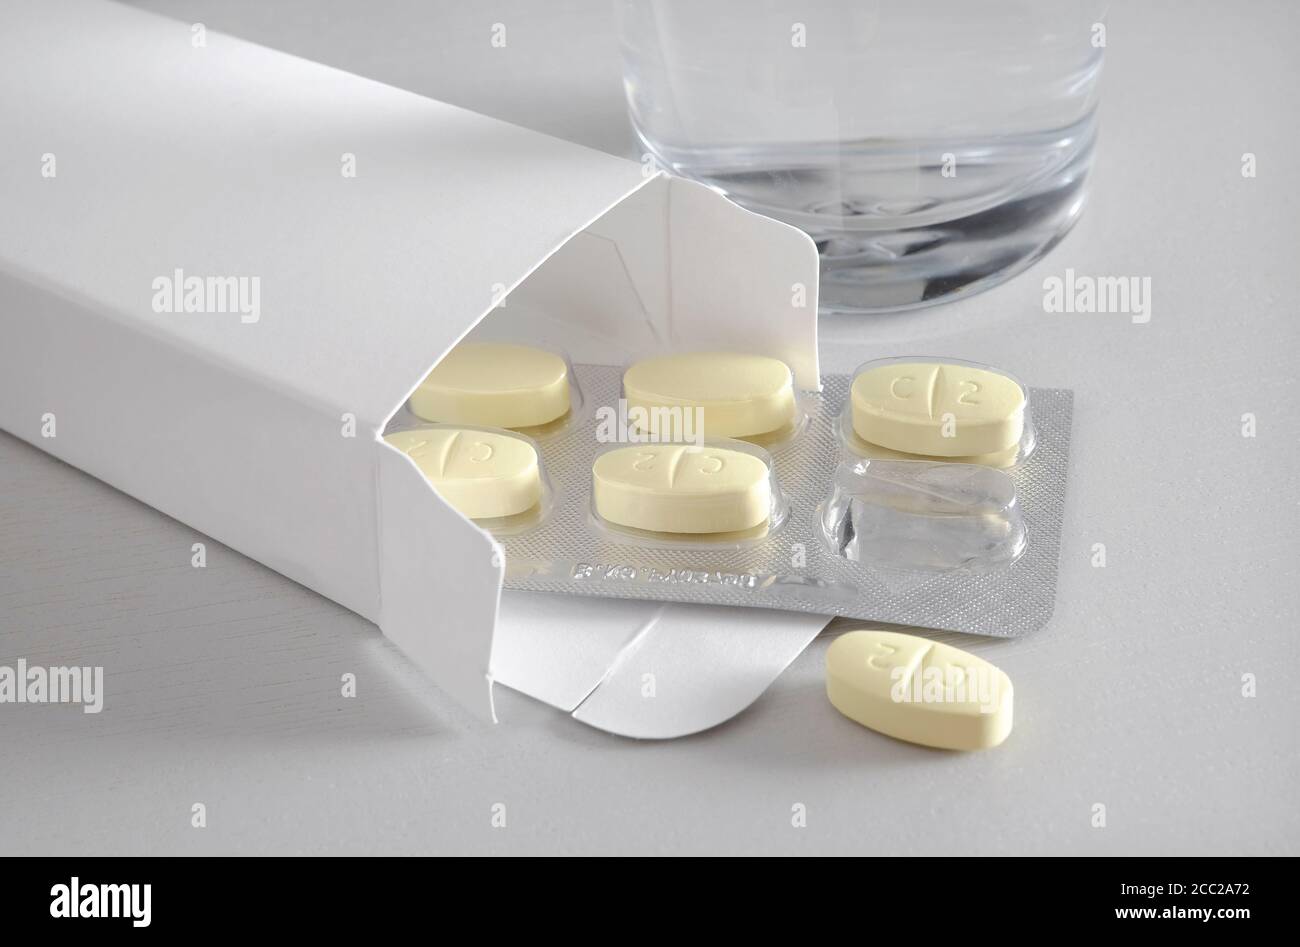 clarithromycin tablets in white box on grey background Stock Photo